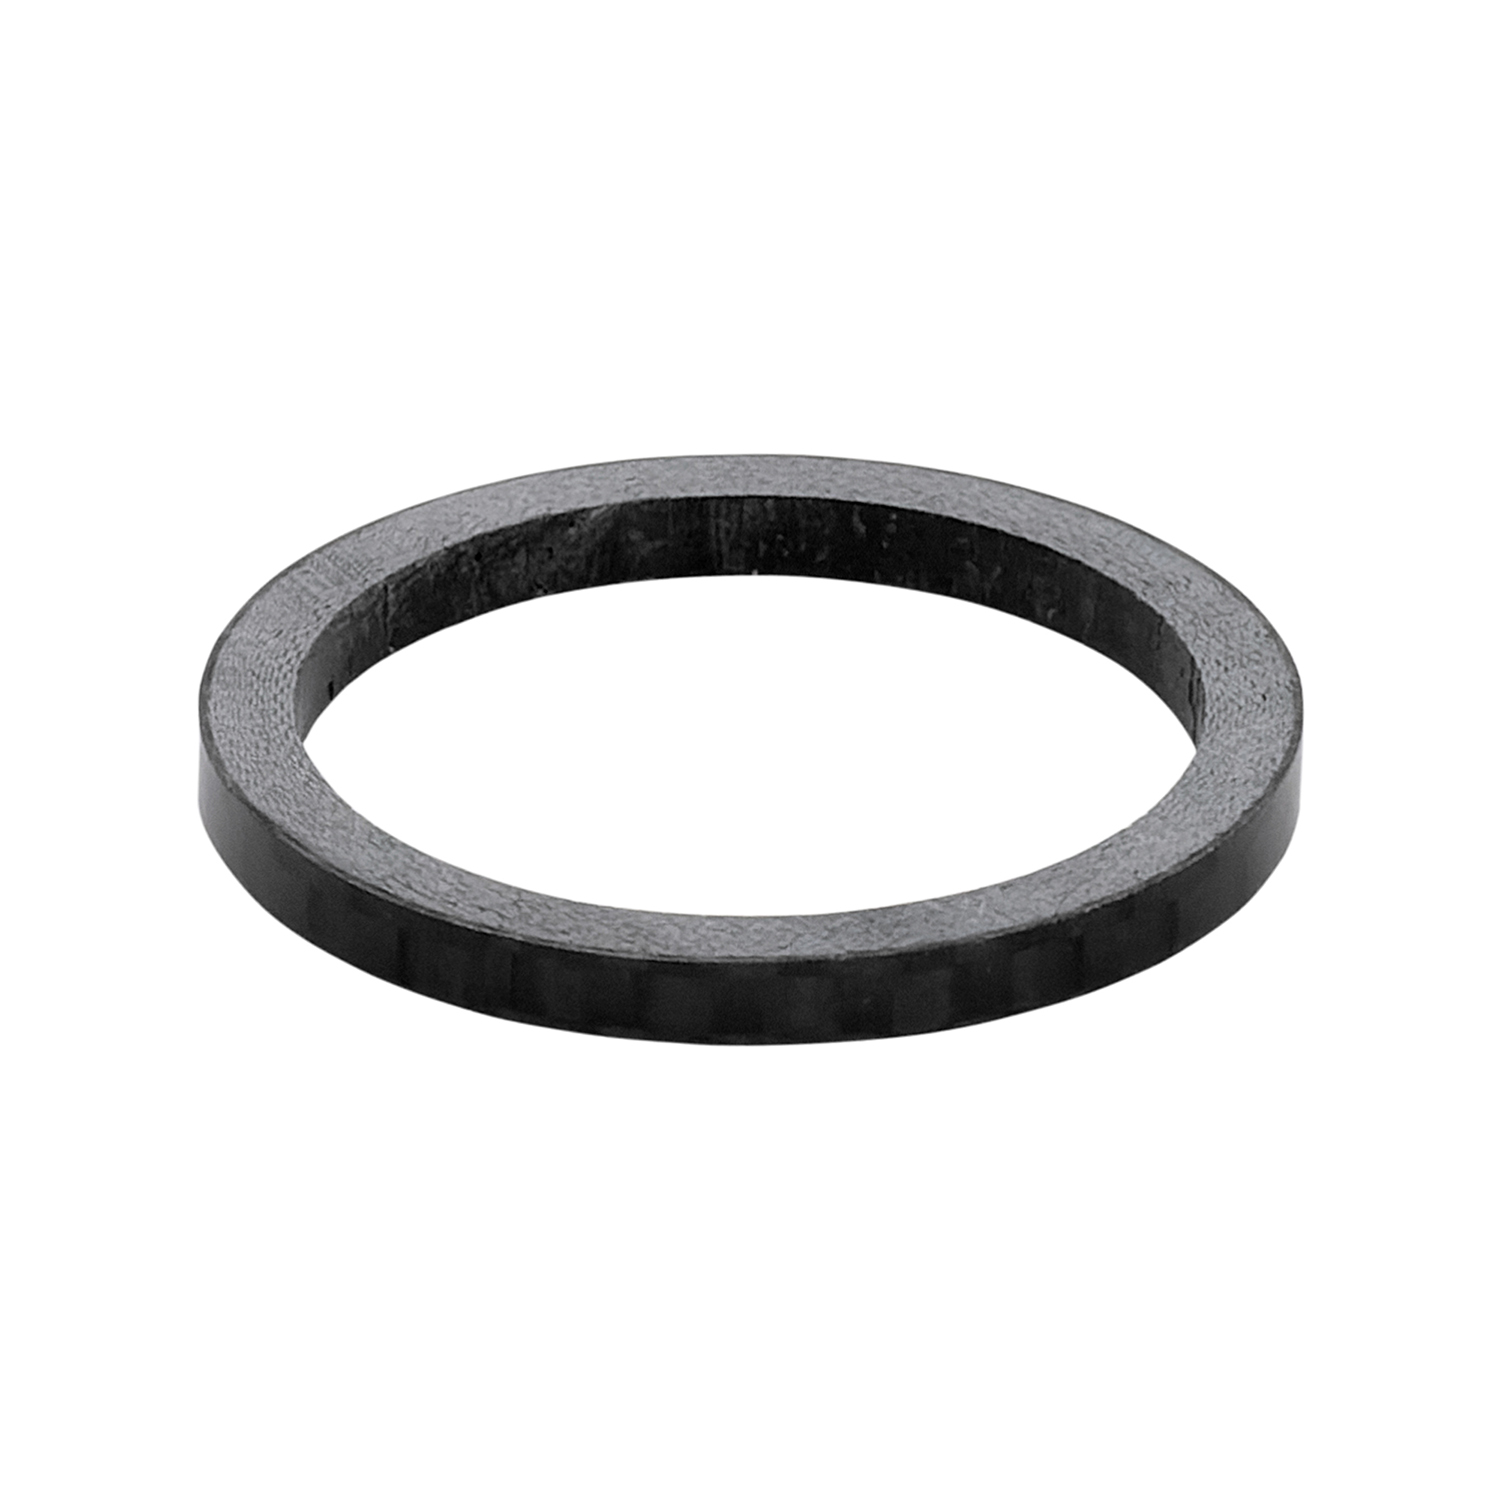 Spacer CARBON 3 mm 1 1/8